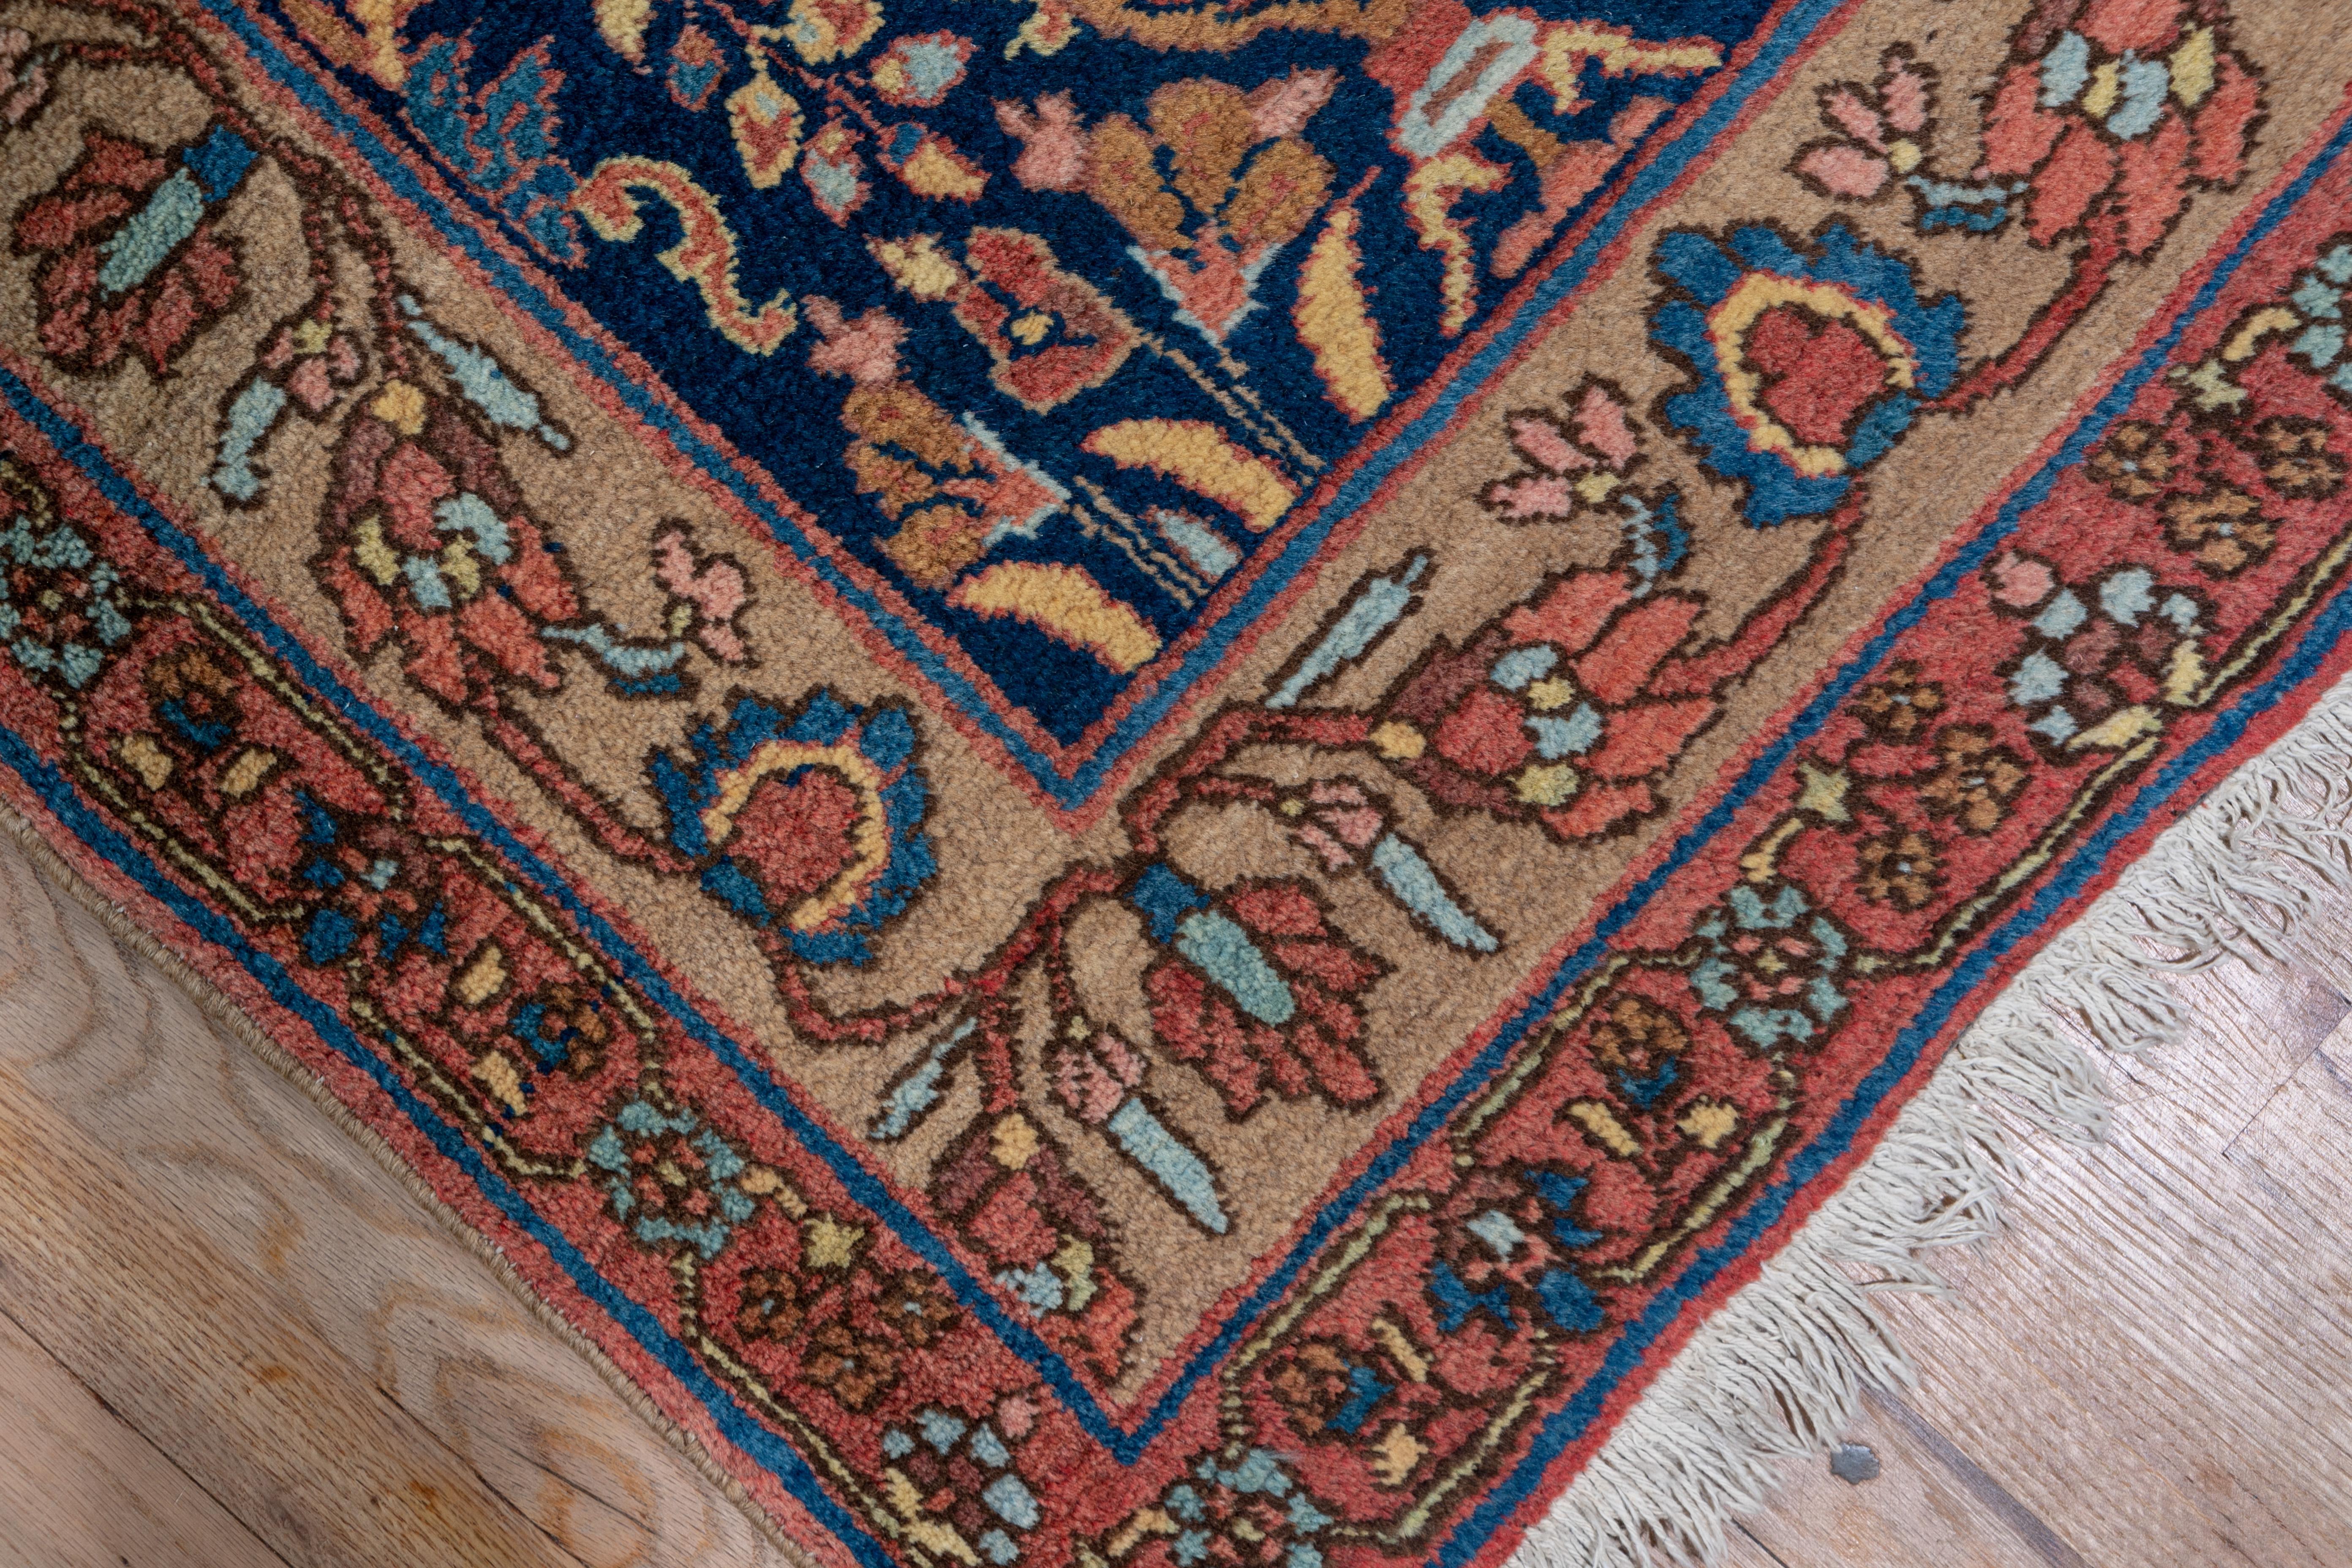 This versatile width west Persian rustic Kurdish kenare (renner) displays an abrashed blue field with an ascending tree, vase, flower and stem pattern accented in rose, green and light blue. Palmette and Meander main border. Solidly woven, medium